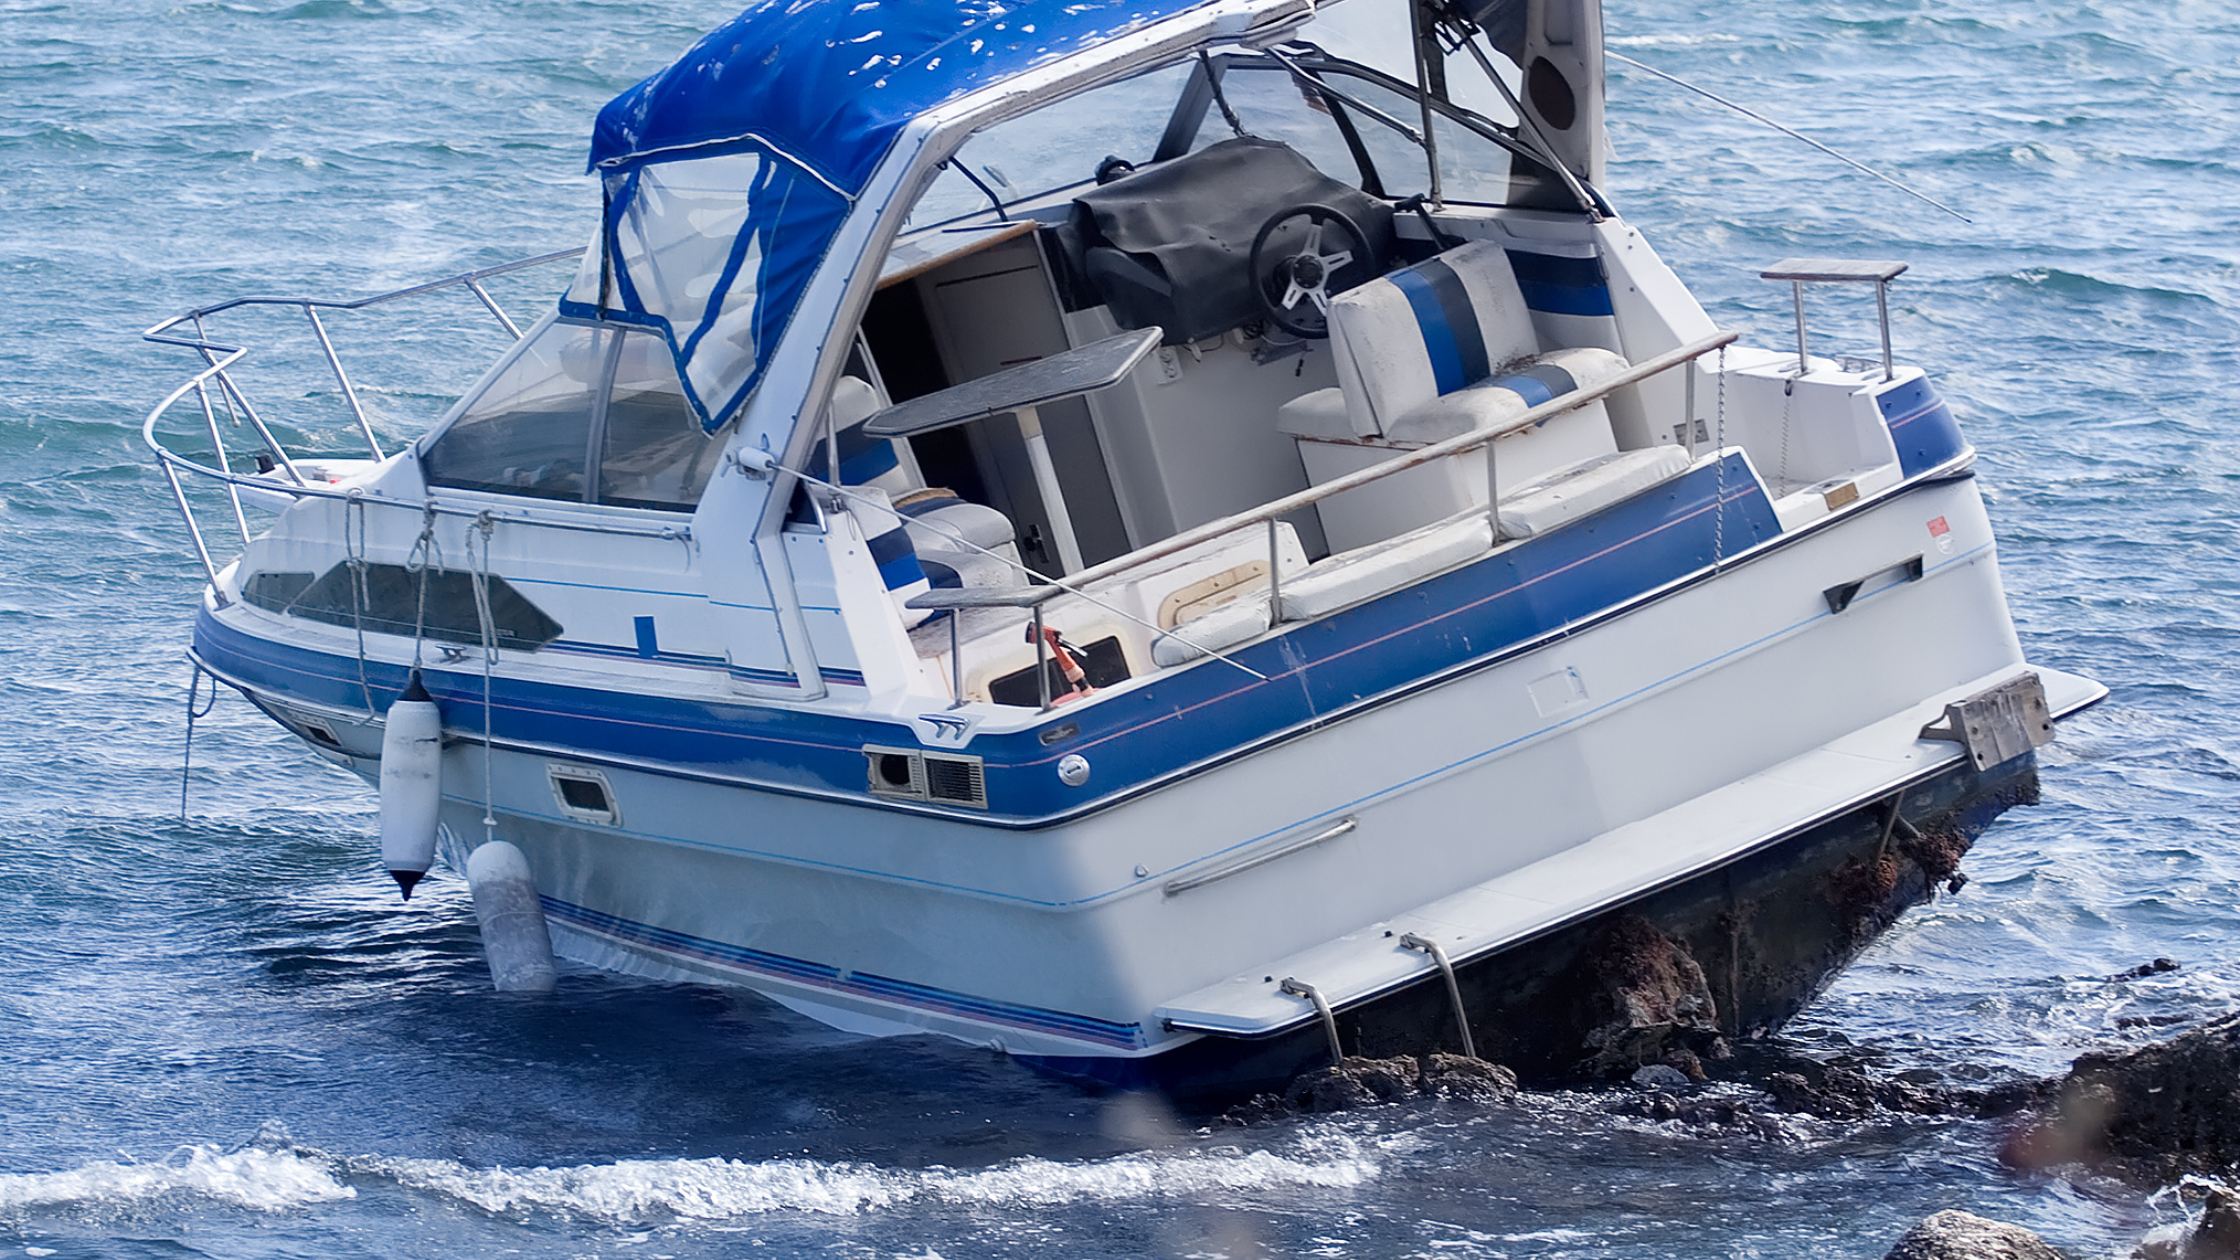 Boat Accident Lawyer In Riverside, CA